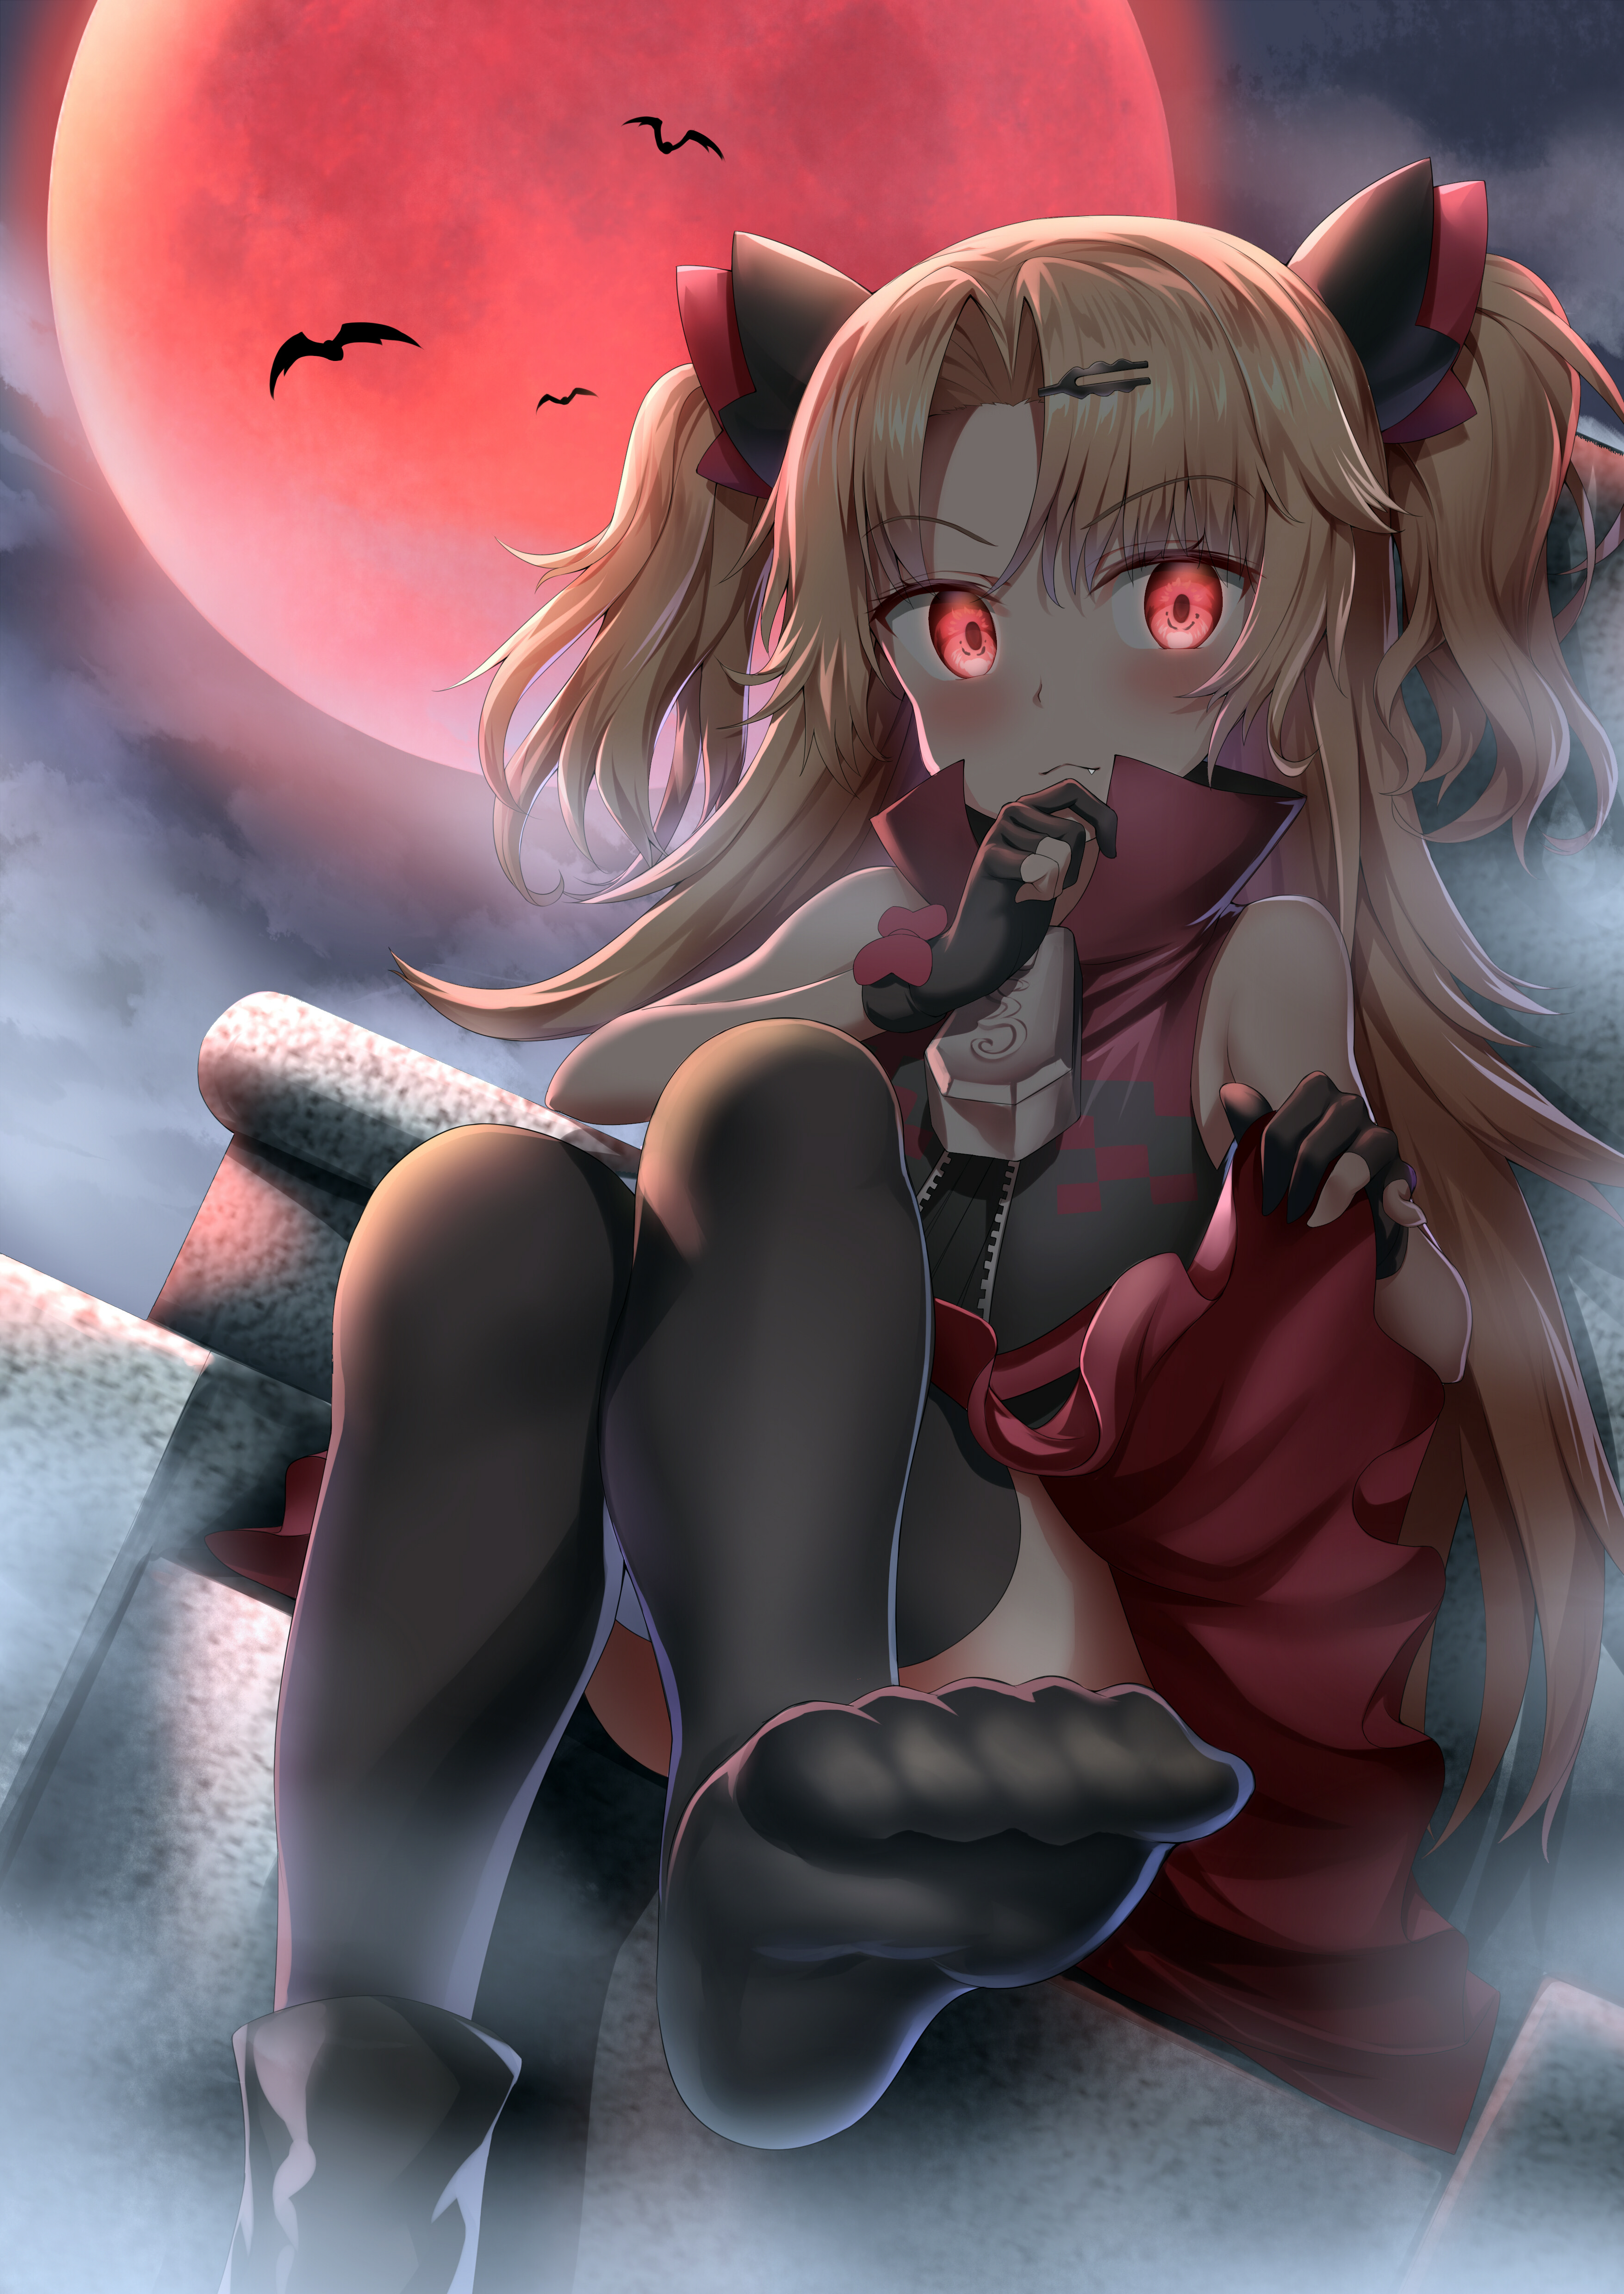 Anime 3509x4957 Halloween witch hat feet thigh-highs anime girls blonde Moon anime bats foot sole curled toes stockings black stockings portrait display